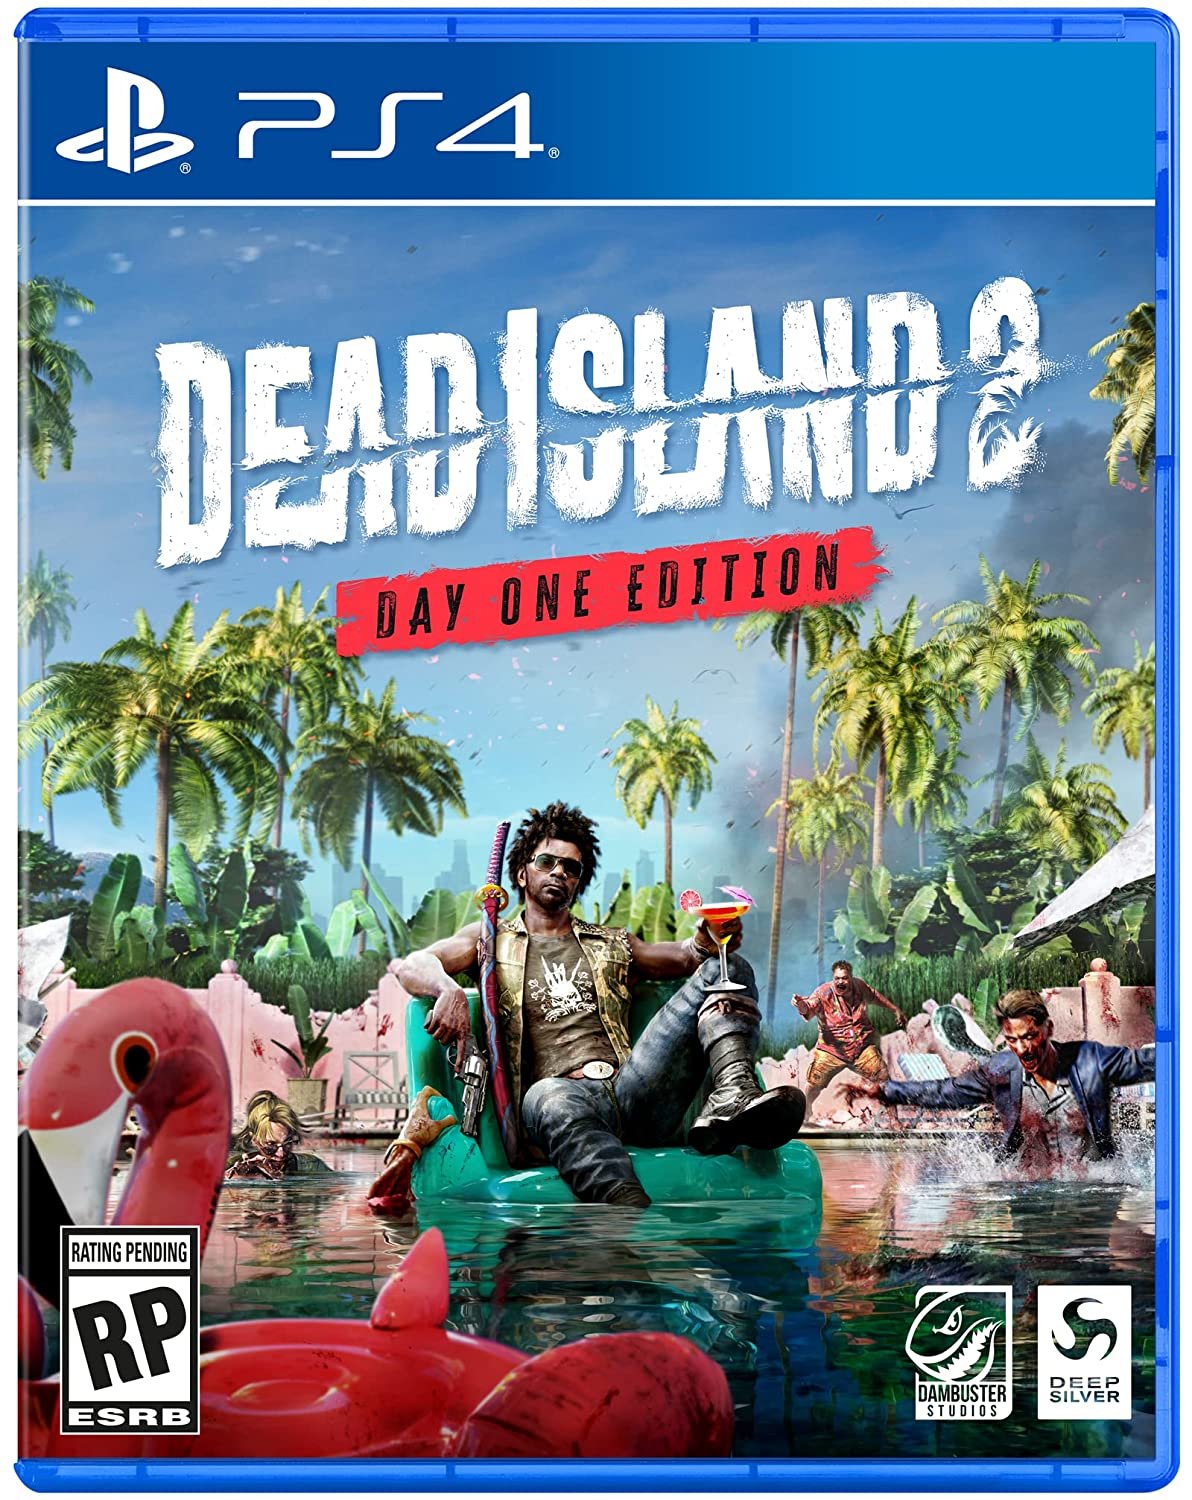 i made a Steam library page For dead island 2 (The leaked version)! What do  you guys think? : r/zombies